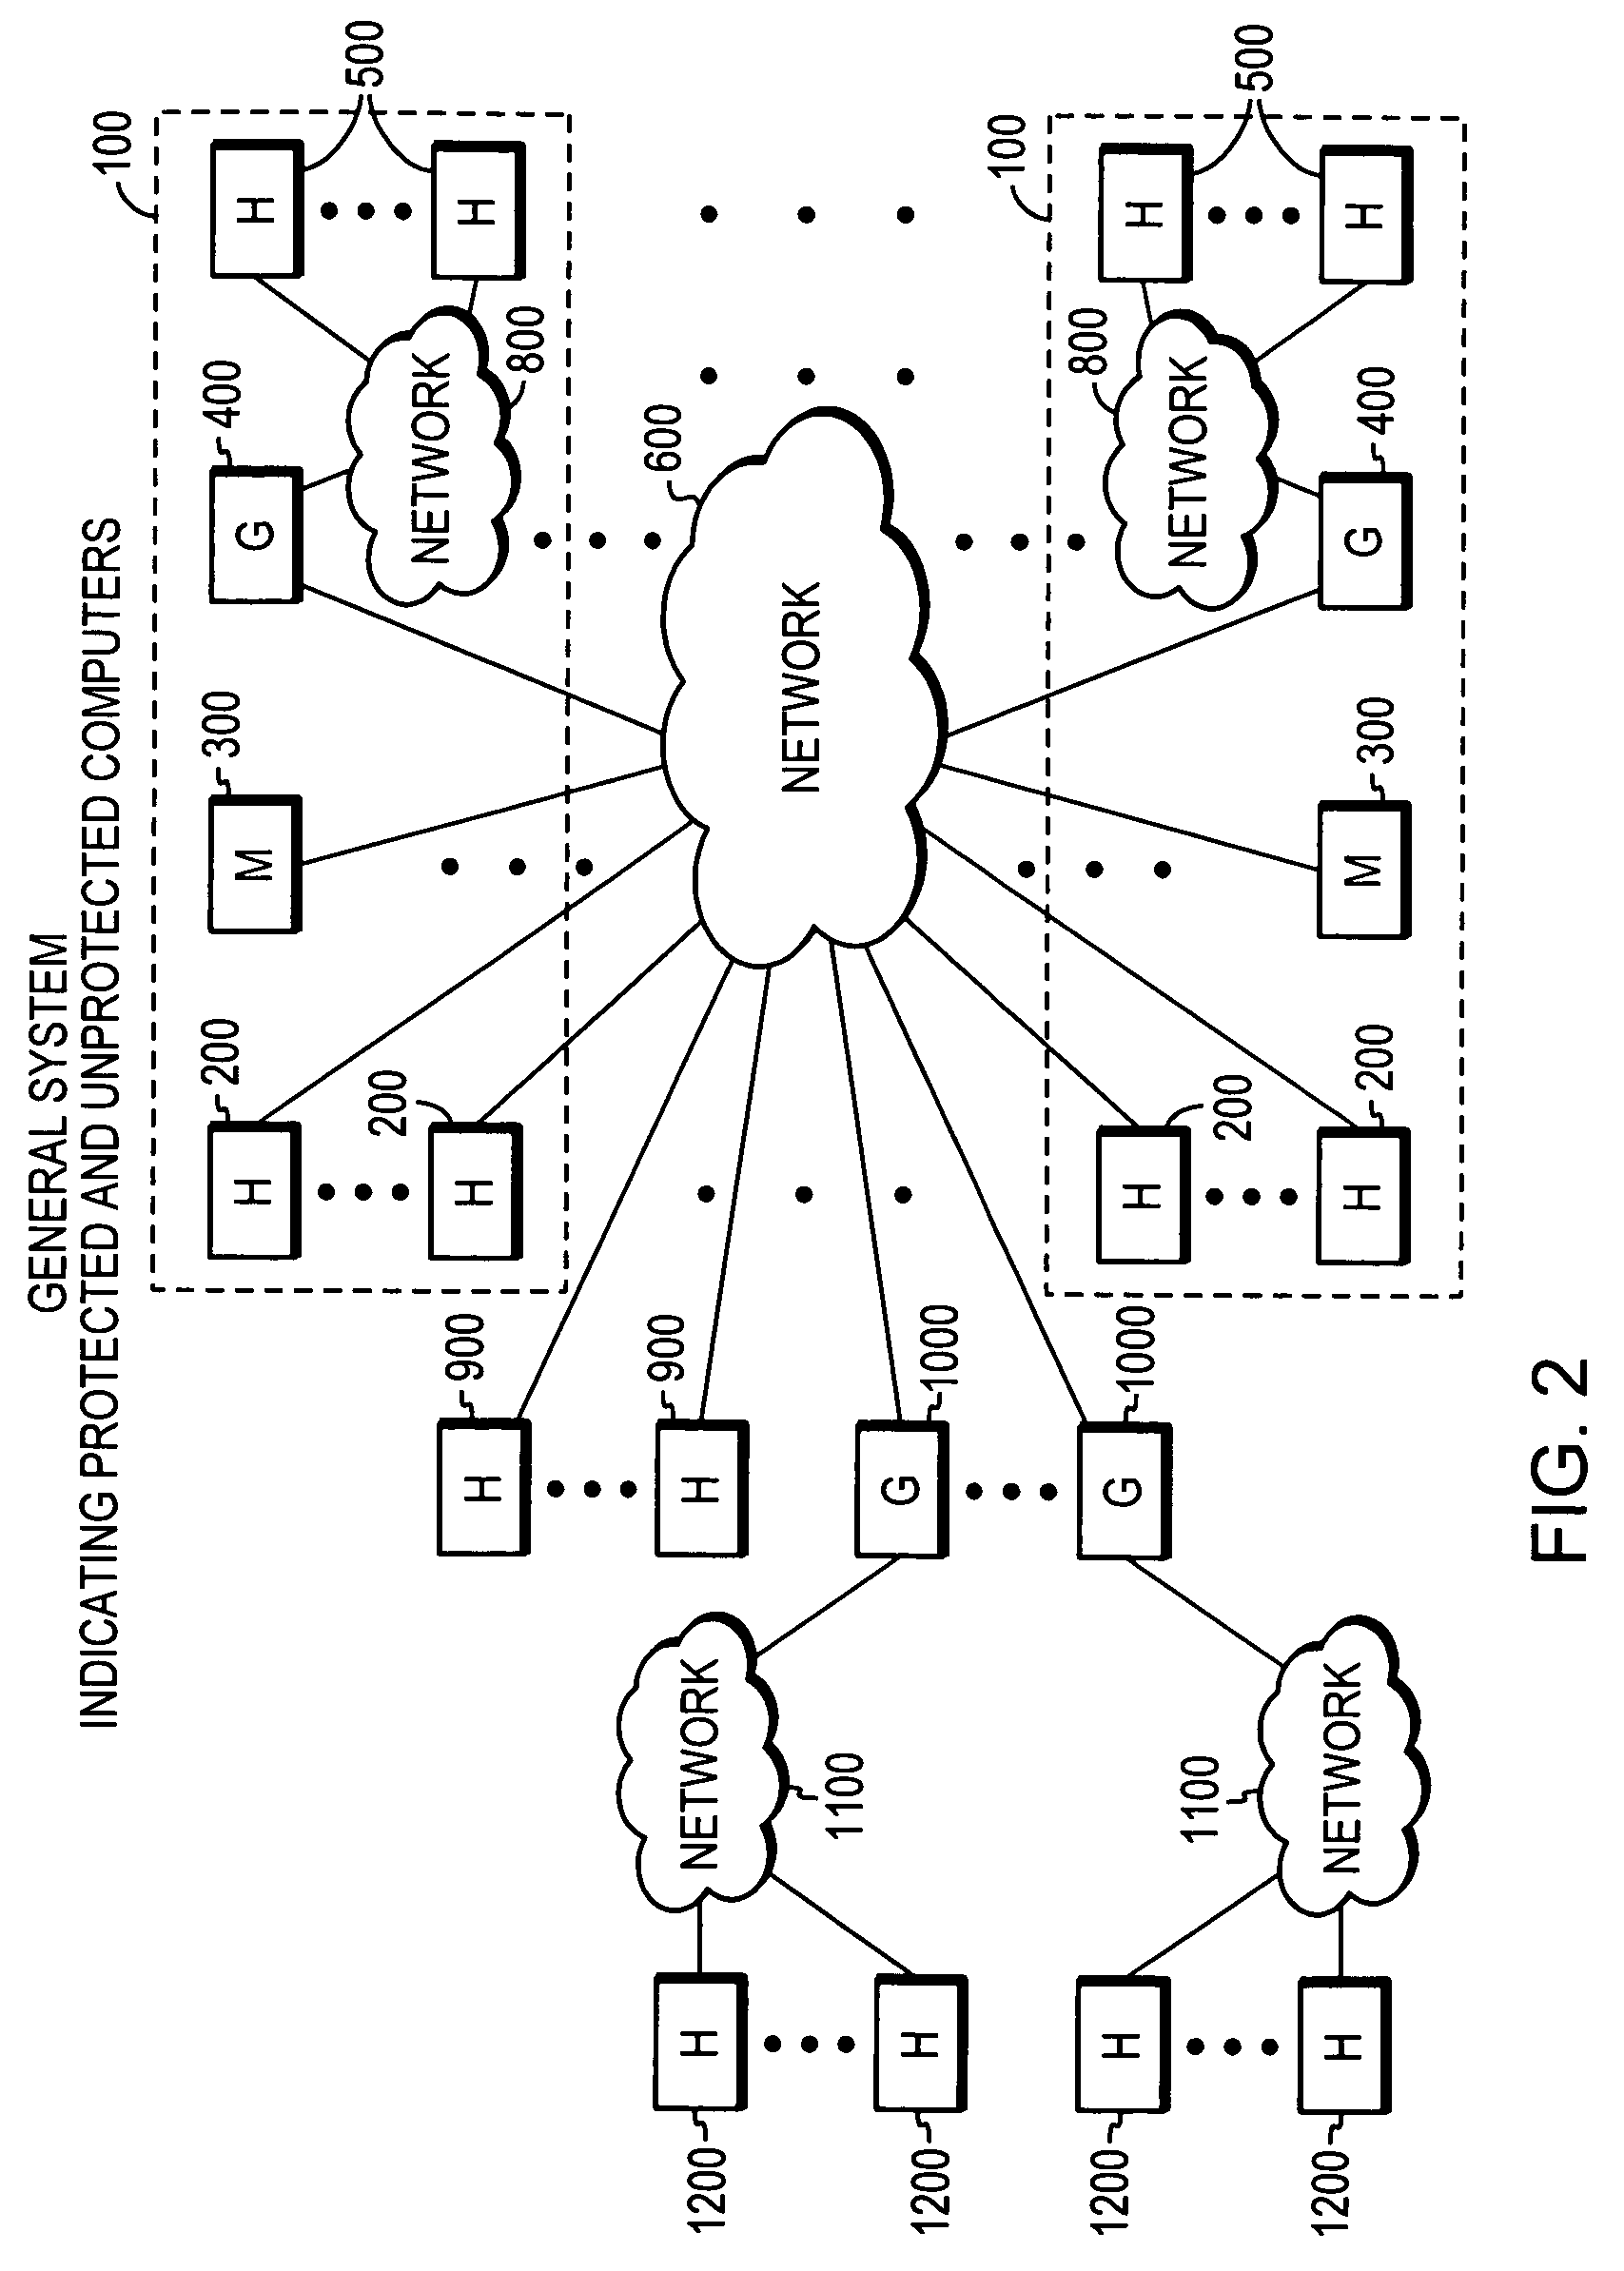 System, apparatuses, methods and computer-readable media for determining the security status of a computer before establishing a network connection